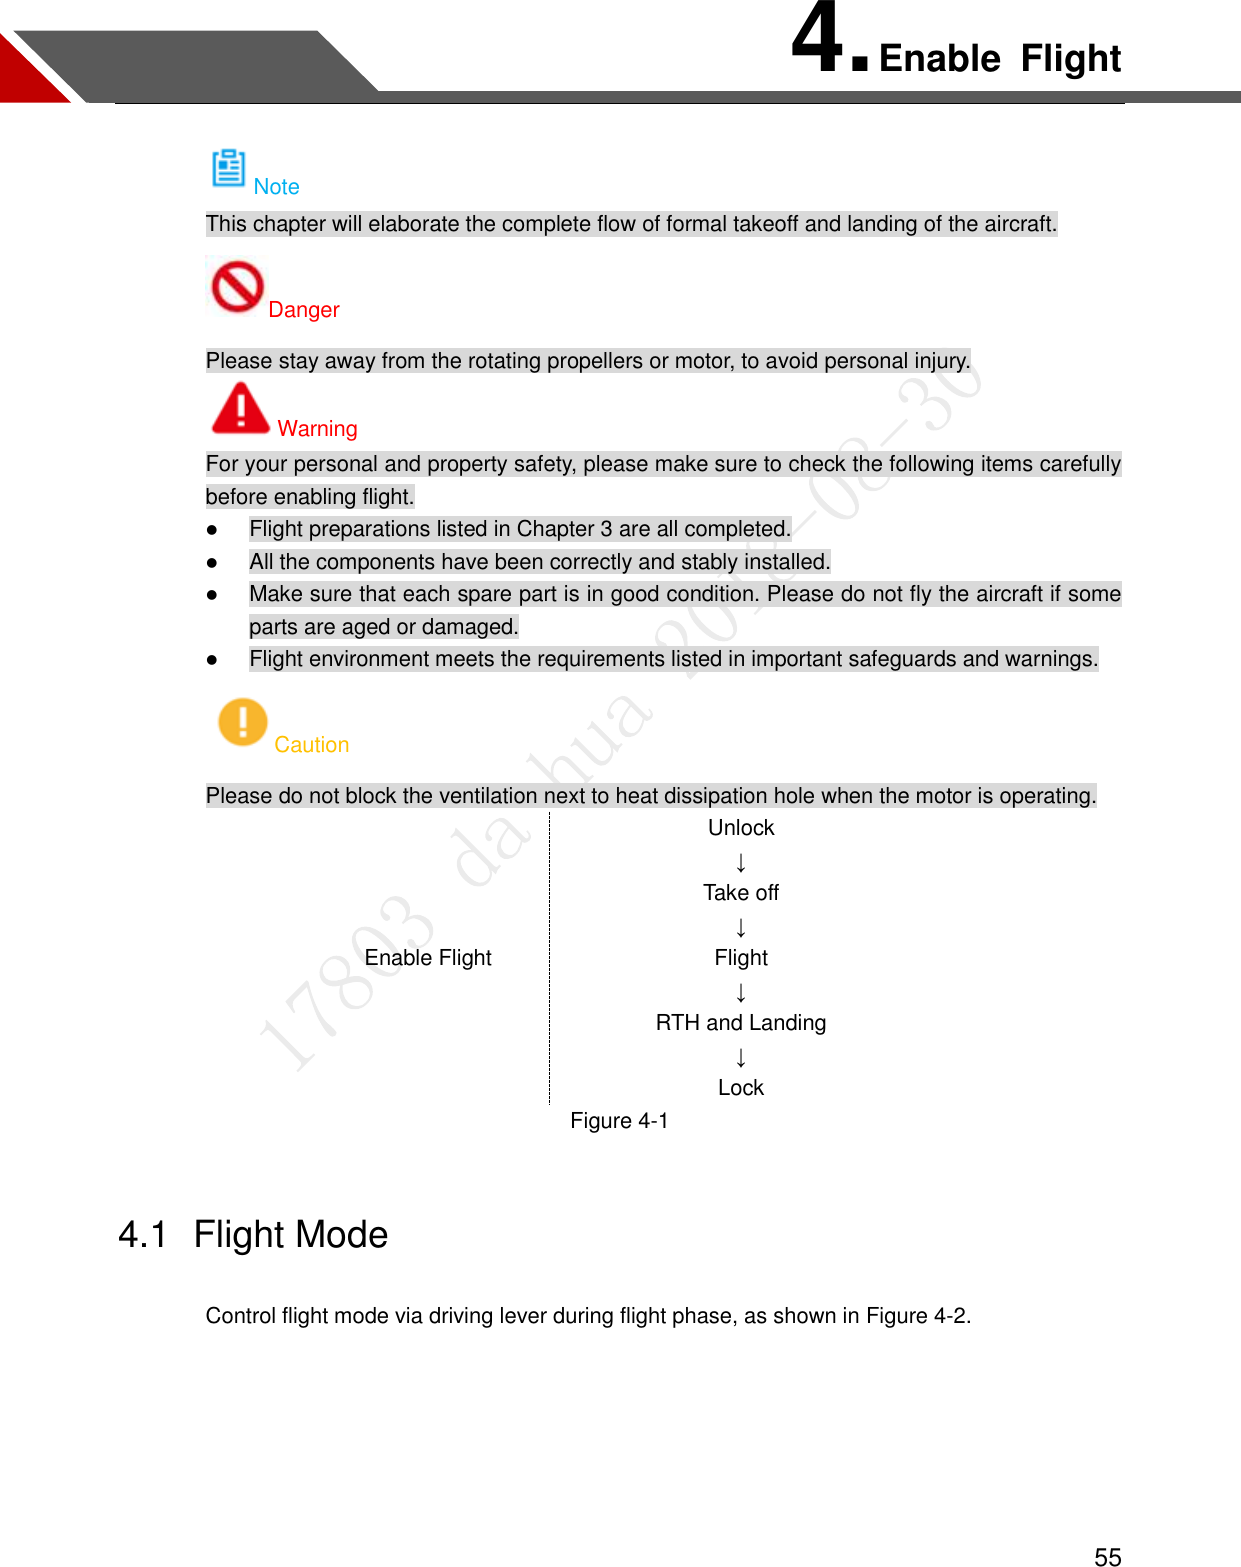  55 4. Enable  Flight Note This chapter will elaborate the complete flow of formal takeoff and landing of the aircraft. Danger Please stay away from the rotating propellers or motor, to avoid personal injury. Warning For your personal and property safety, please make sure to check the following items carefully before enabling flight.  Flight preparations listed in Chapter 3 are all completed.  All the components have been correctly and stably installed.  Make sure that each spare part is in good condition. Please do not fly the aircraft if some parts are aged or damaged.  Flight environment meets the requirements listed in important safeguards and warnings. Caution Please do not block the ventilation next to heat dissipation hole when the motor is operating. Enable Flight Unlock ↓ Take off ↓ Flight ↓ RTH and Landing ↓ Lock Figure 4-1 4.1  Flight Mode Control flight mode via driving lever during flight phase, as shown in Figure 4-2.  